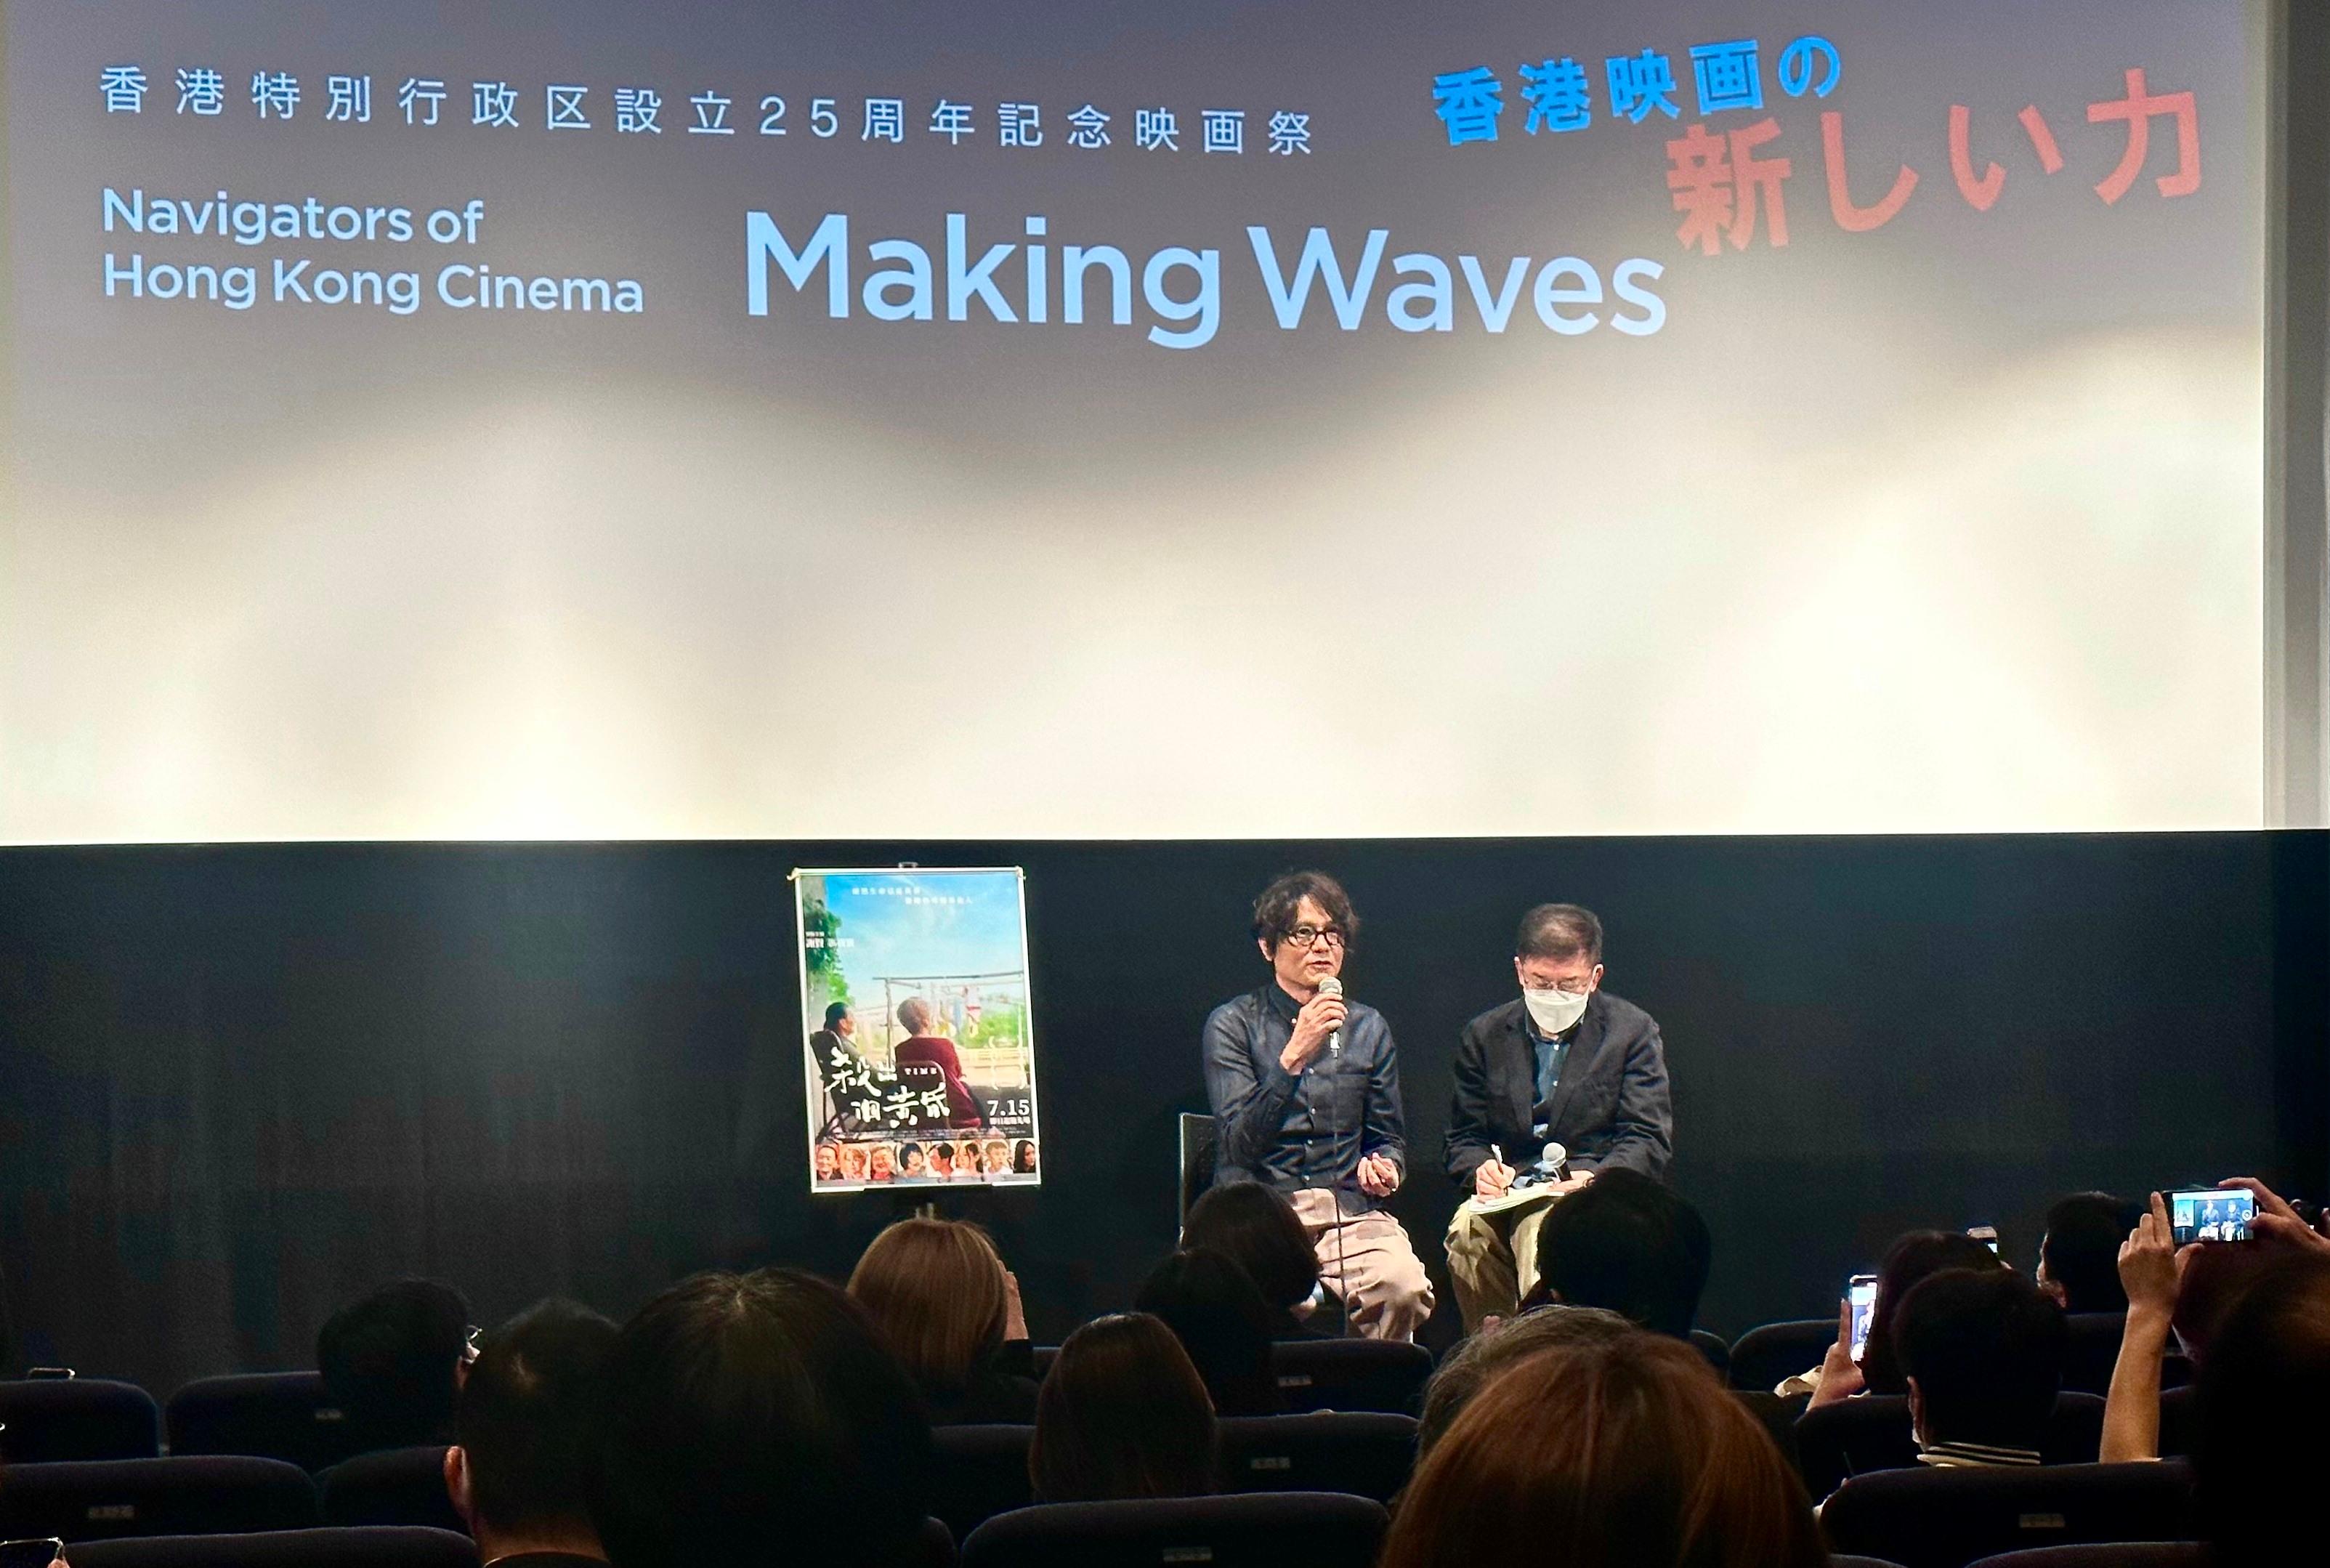 To commemorate the 25th anniversary of the establishment of the Hong Kong Special Administrative Region, Create Hong Kong presented "Making Waves - Navigators of Hong Kong Cinema" in Tokyo, Japan, showcasing a selection of new Hong Kong films and classics with support from the Hong Kong Economic and Trade Office in Tokyo from today (November 9) to November 13. Photo shows the producer and screenwriter of "Time" Gordon Lam (left), participating in a sharing session with the audience after the screening today.